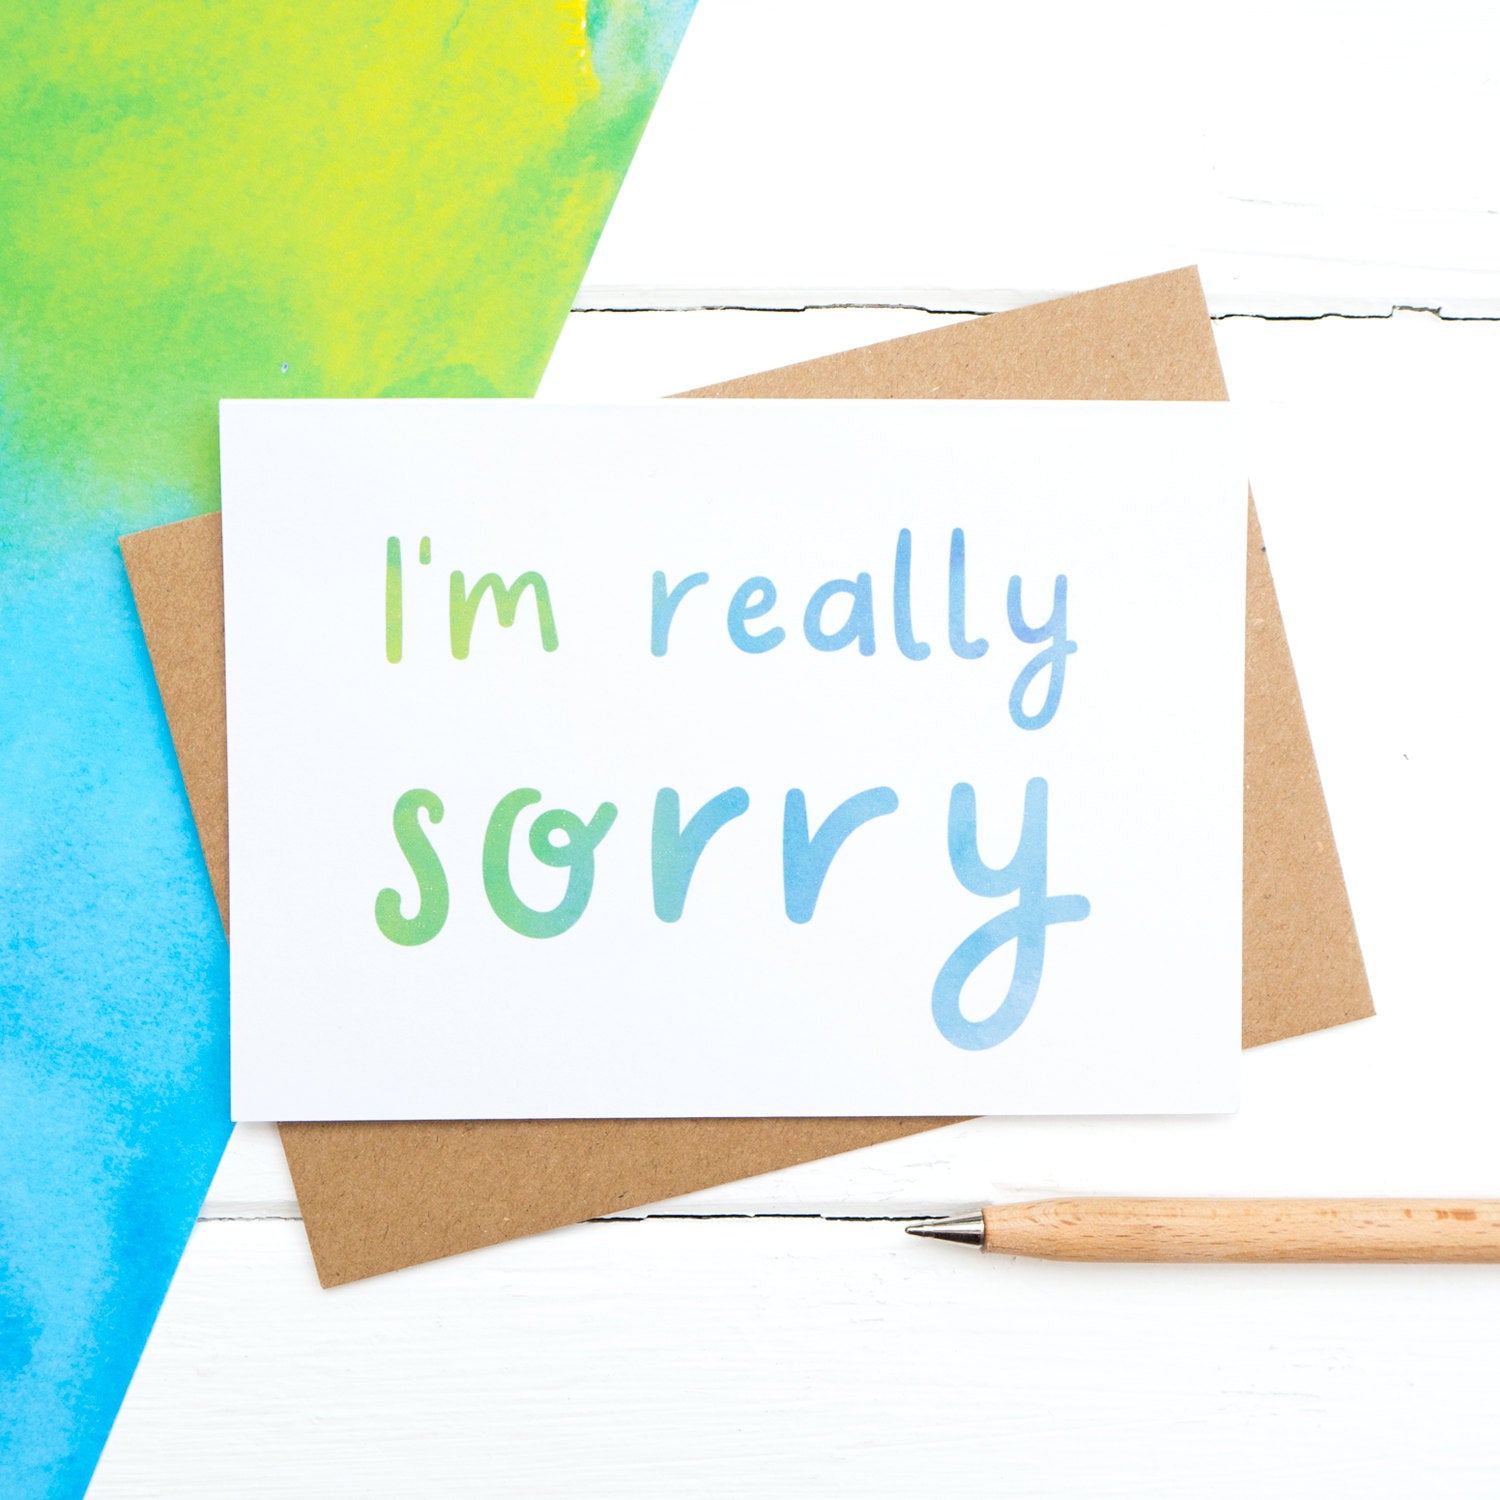 I'm really sorry - a simple but bright sympathy card for sending your condolences